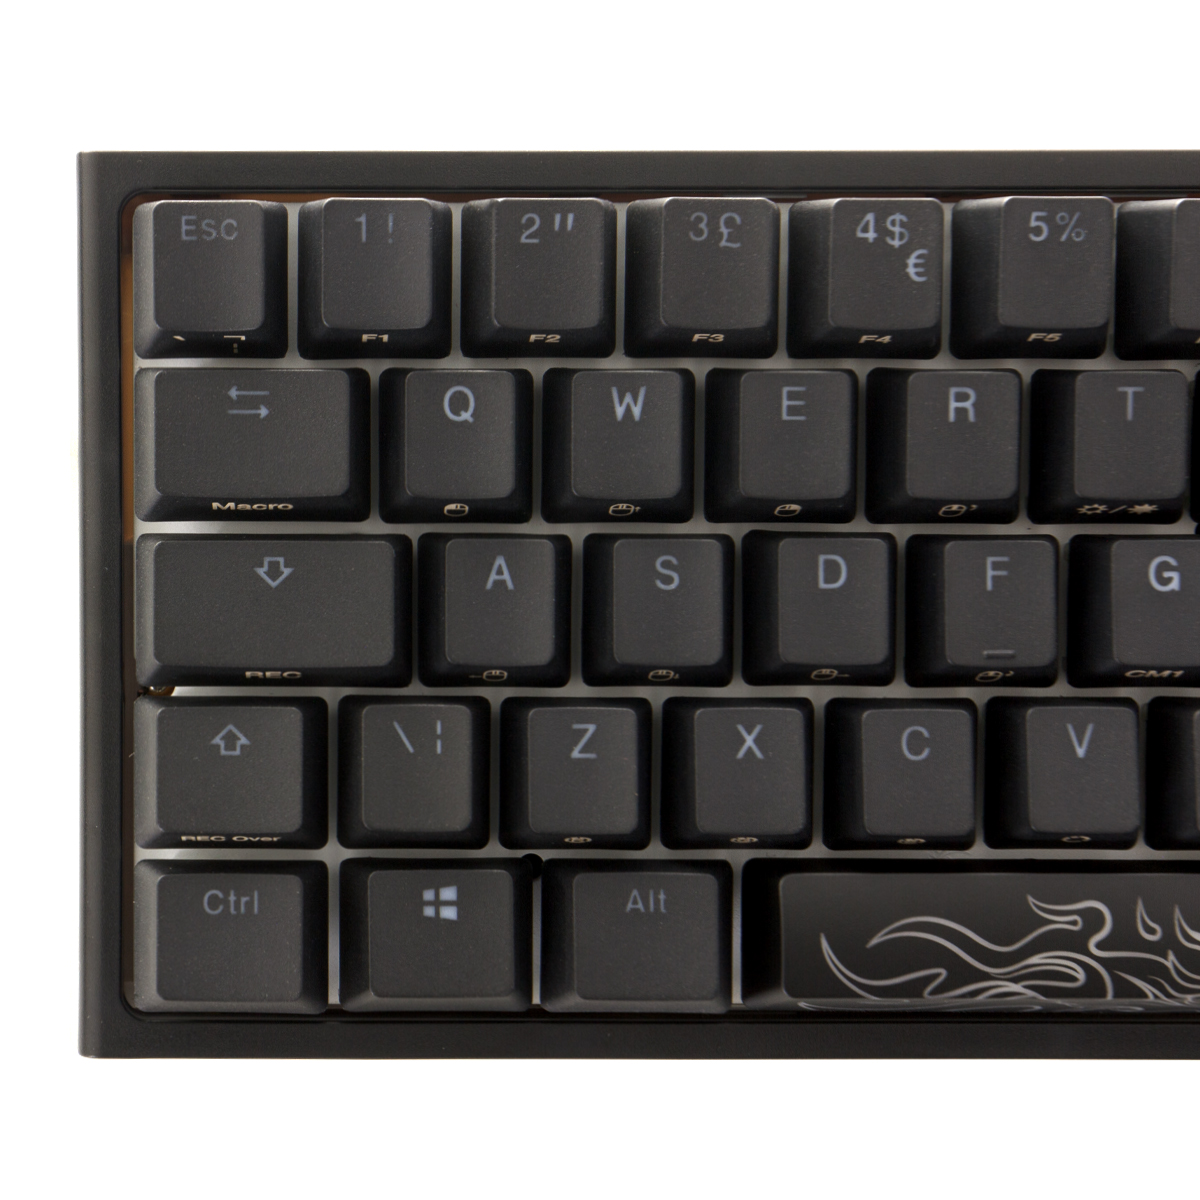 Ducky - Ducky One 2 Pro Mini 60% Mechanical Gaming Keyboard Black MX Cherry Brown Switch - UK Layout